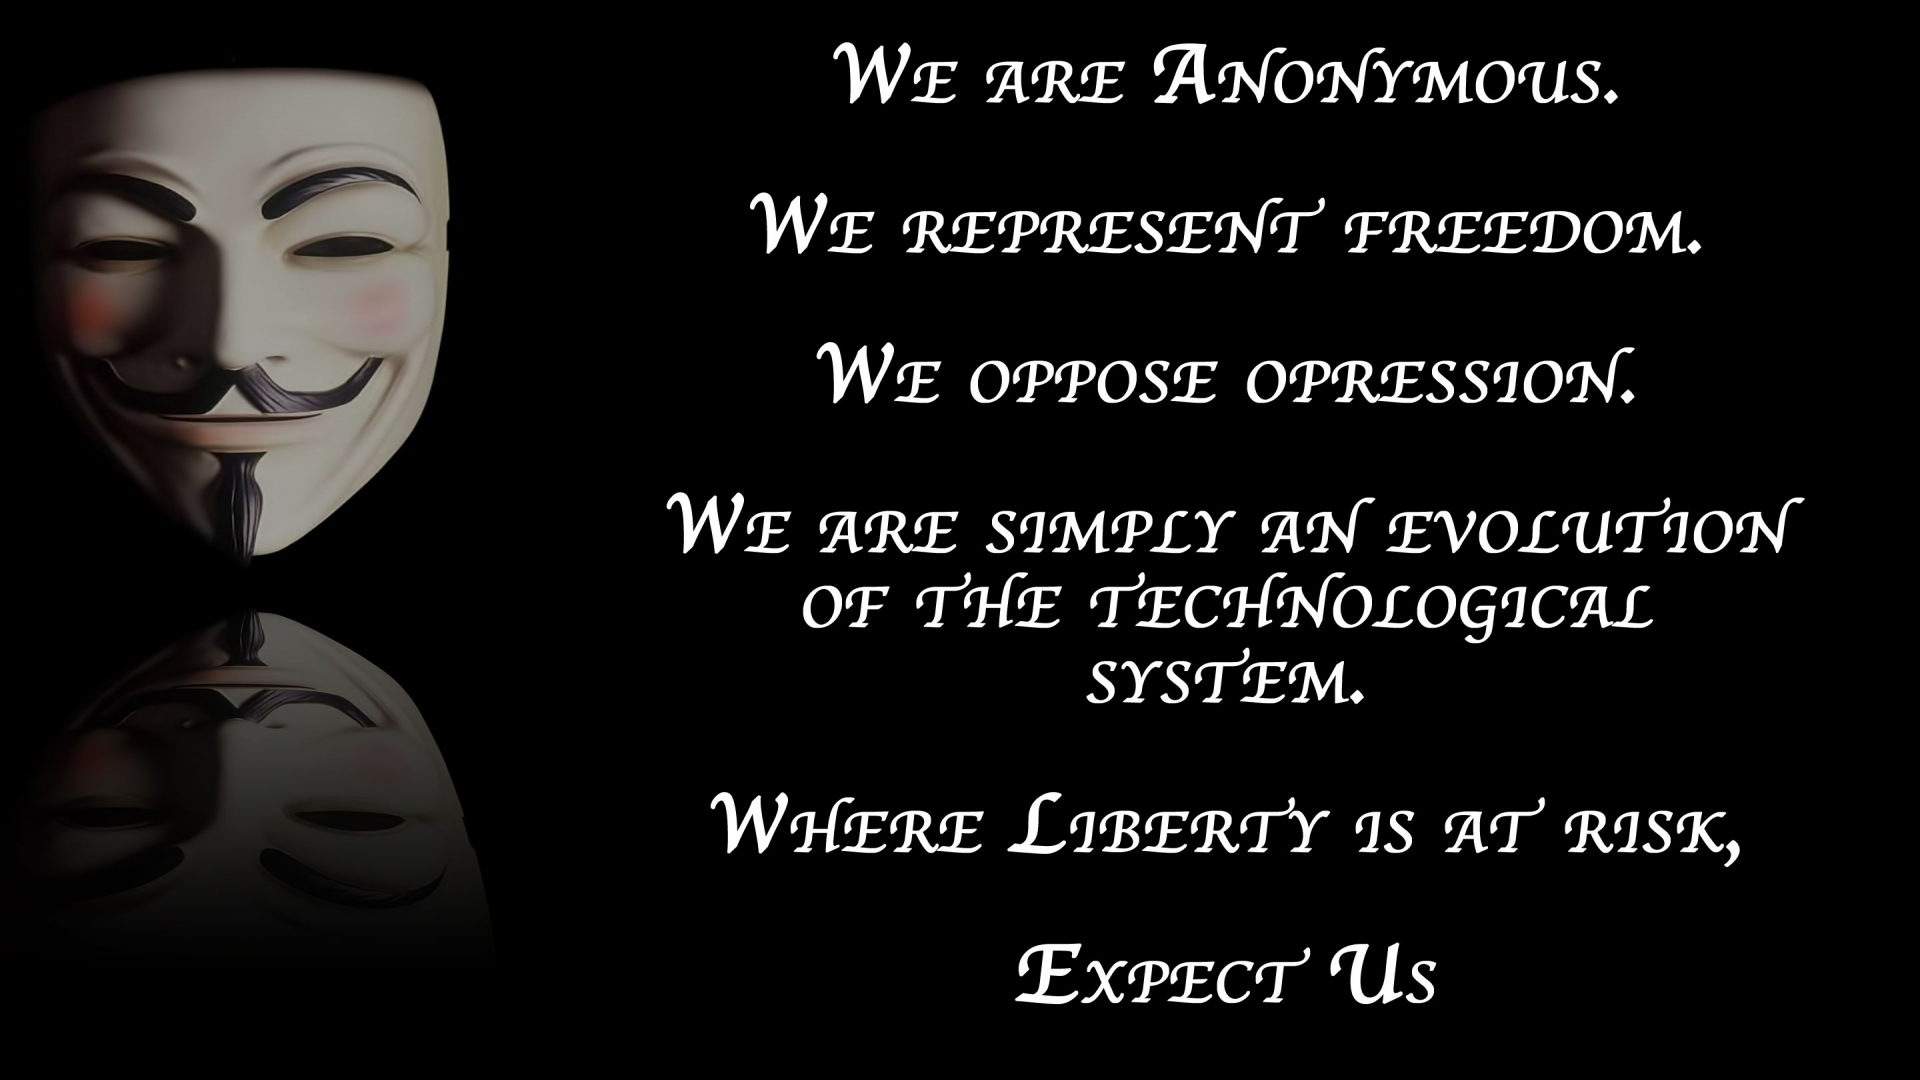 We Are Anonymous Wallpaper   MixHD wallpapers 1920x1080